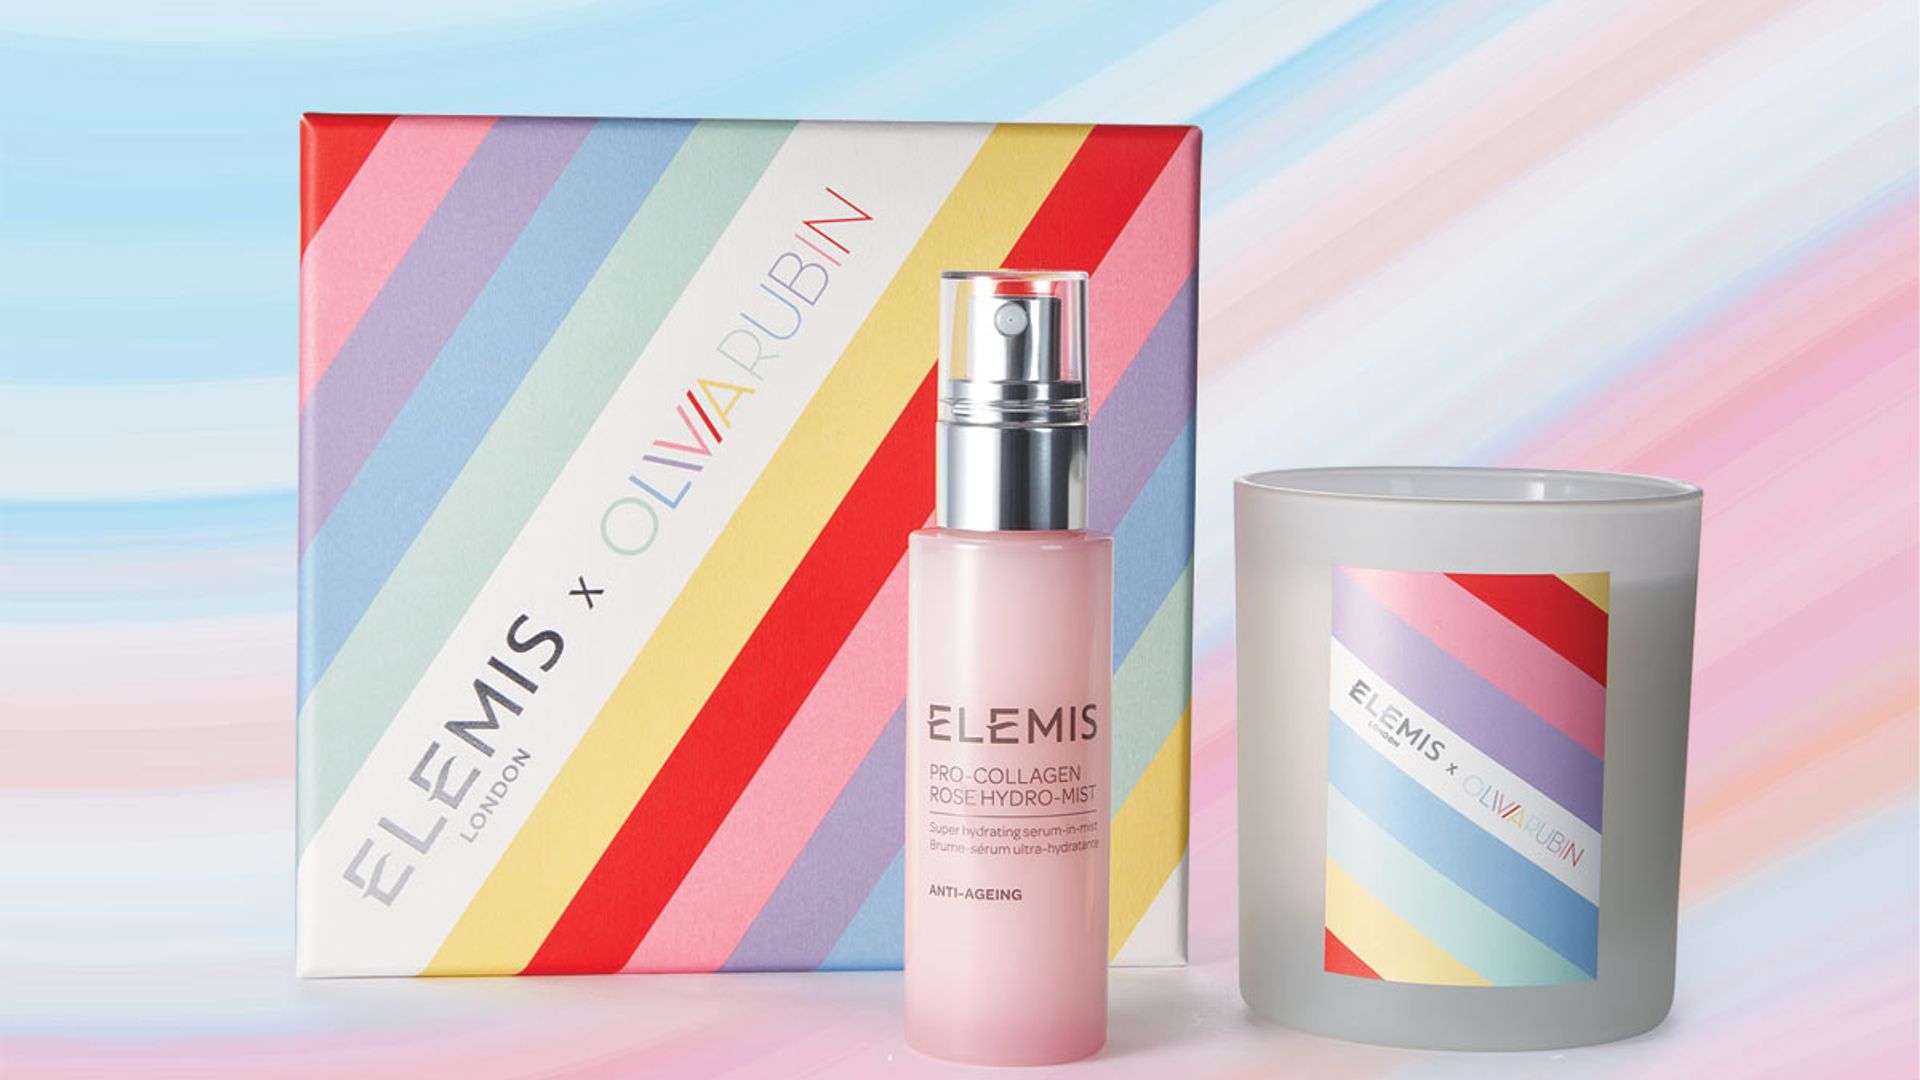 The Olivia Rubin x Elemis skincare and candle set is finally here - here's how you can get hold of it